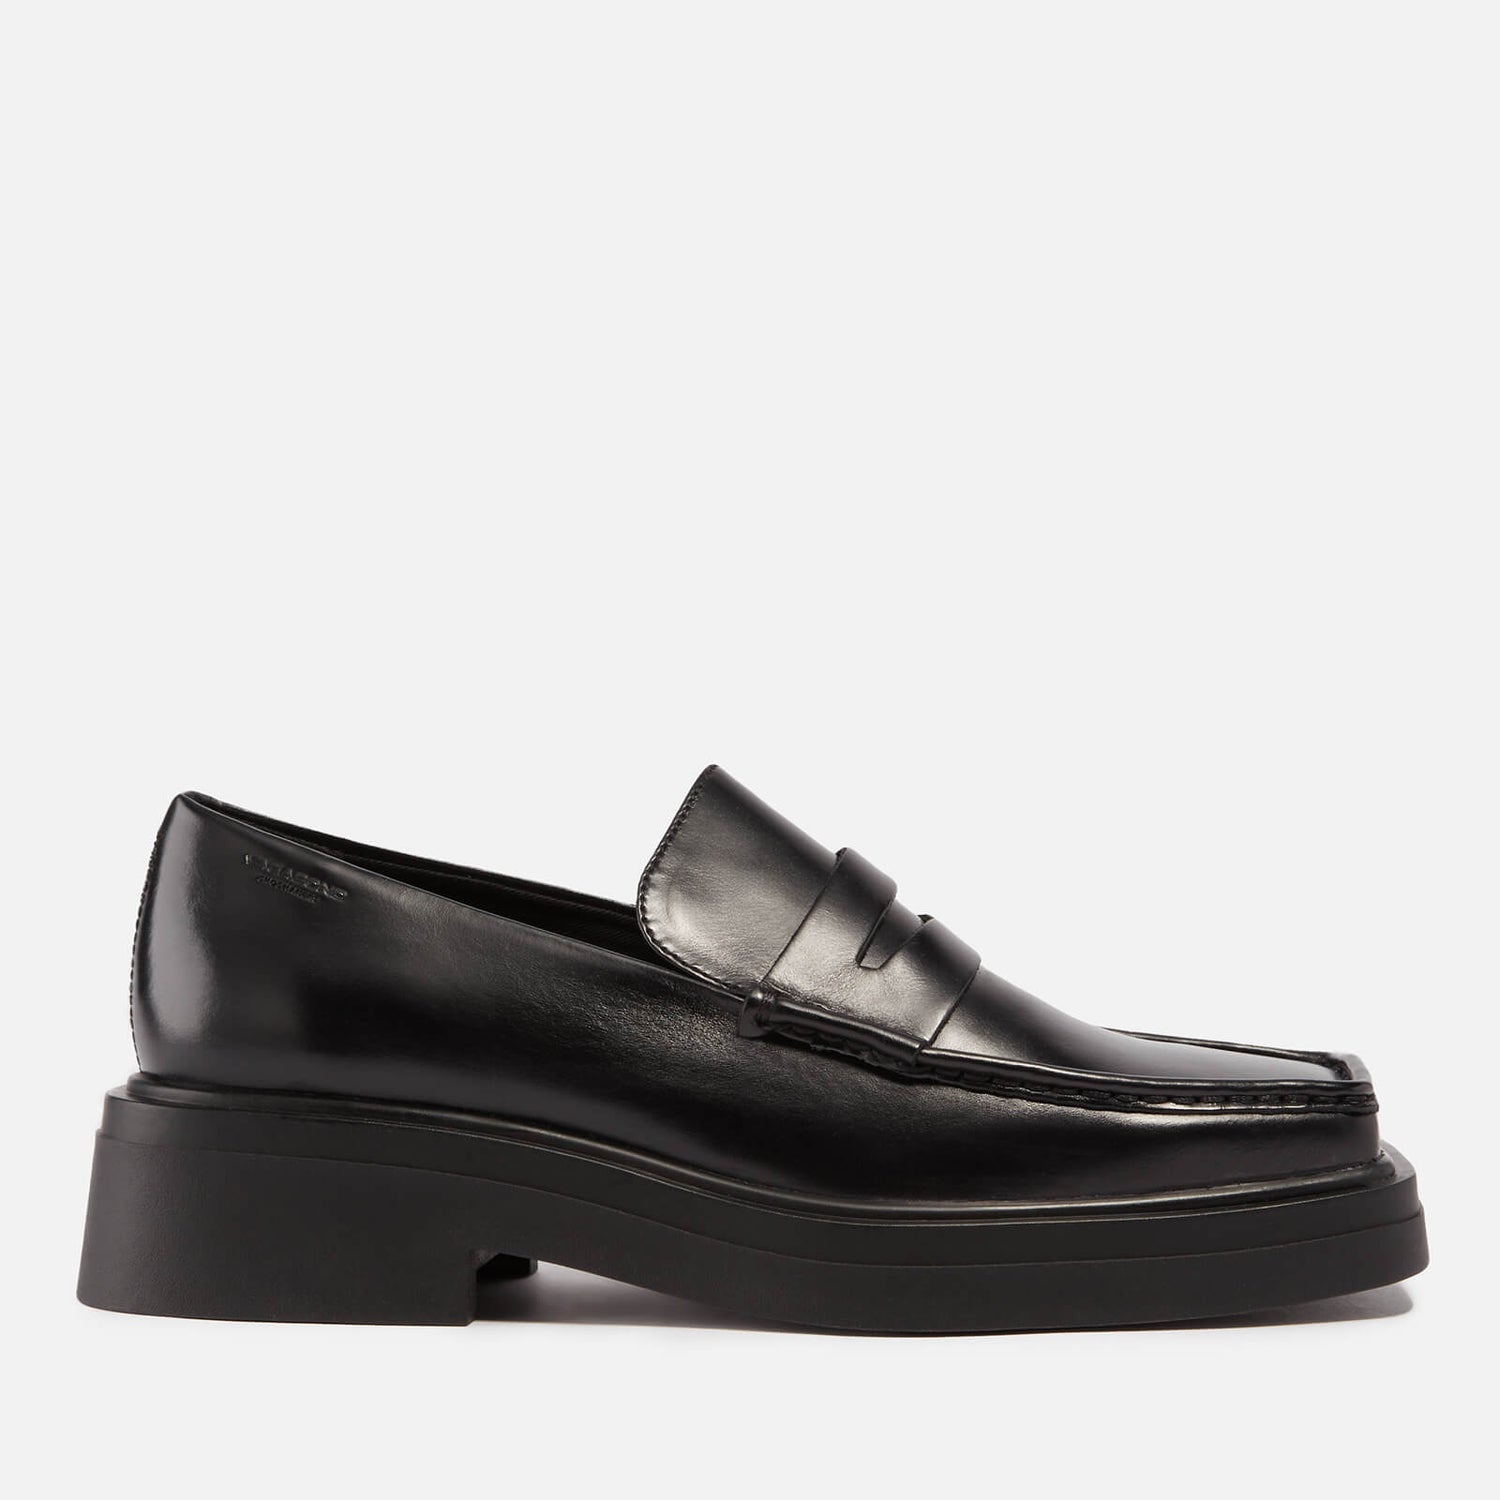 Vagabond Eyra Square Toe Leather Loafers